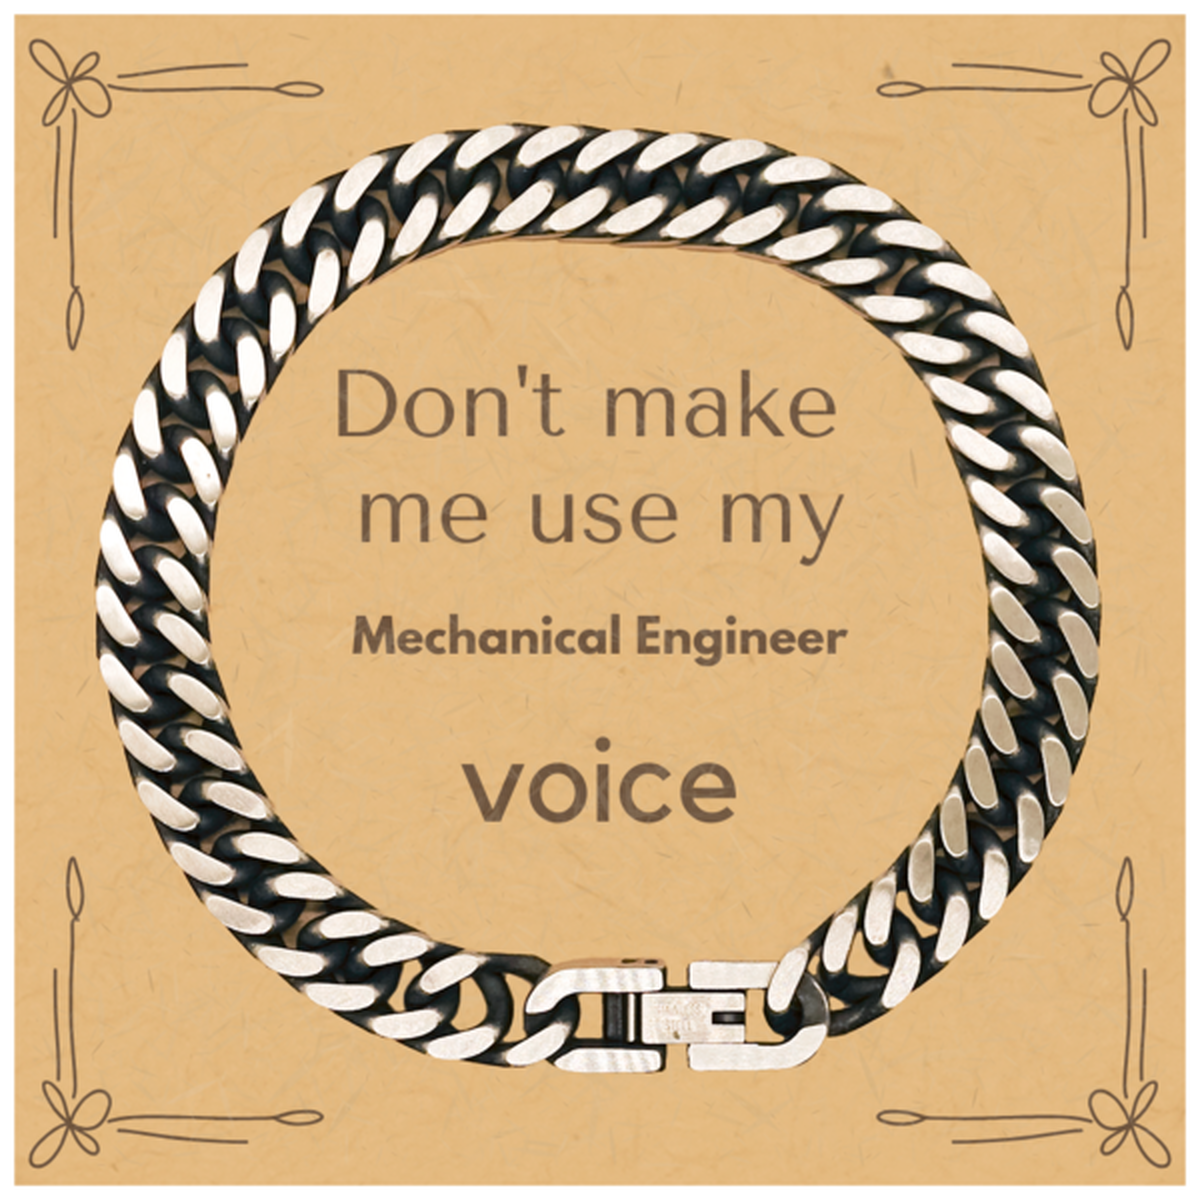 Don't make me use my Mechanical Engineer voice, Sarcasm Mechanical Engineer Card Gifts, Christmas Mechanical Engineer Cuban Link Chain Bracelet Birthday Unique Gifts For Mechanical Engineer Coworkers, Men, Women, Colleague, Friends